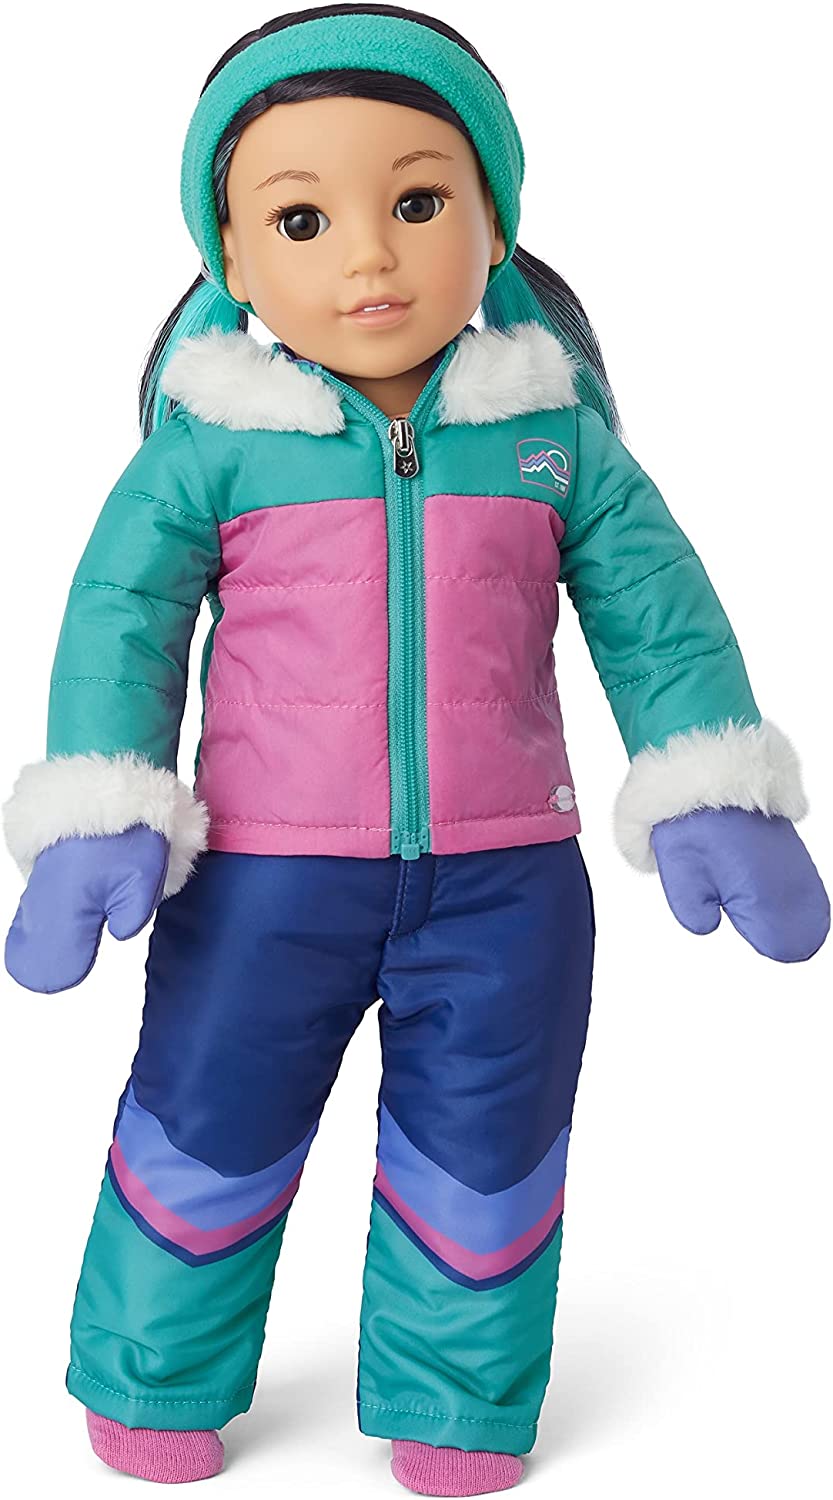 American Girl Corinne's Ski Outfit